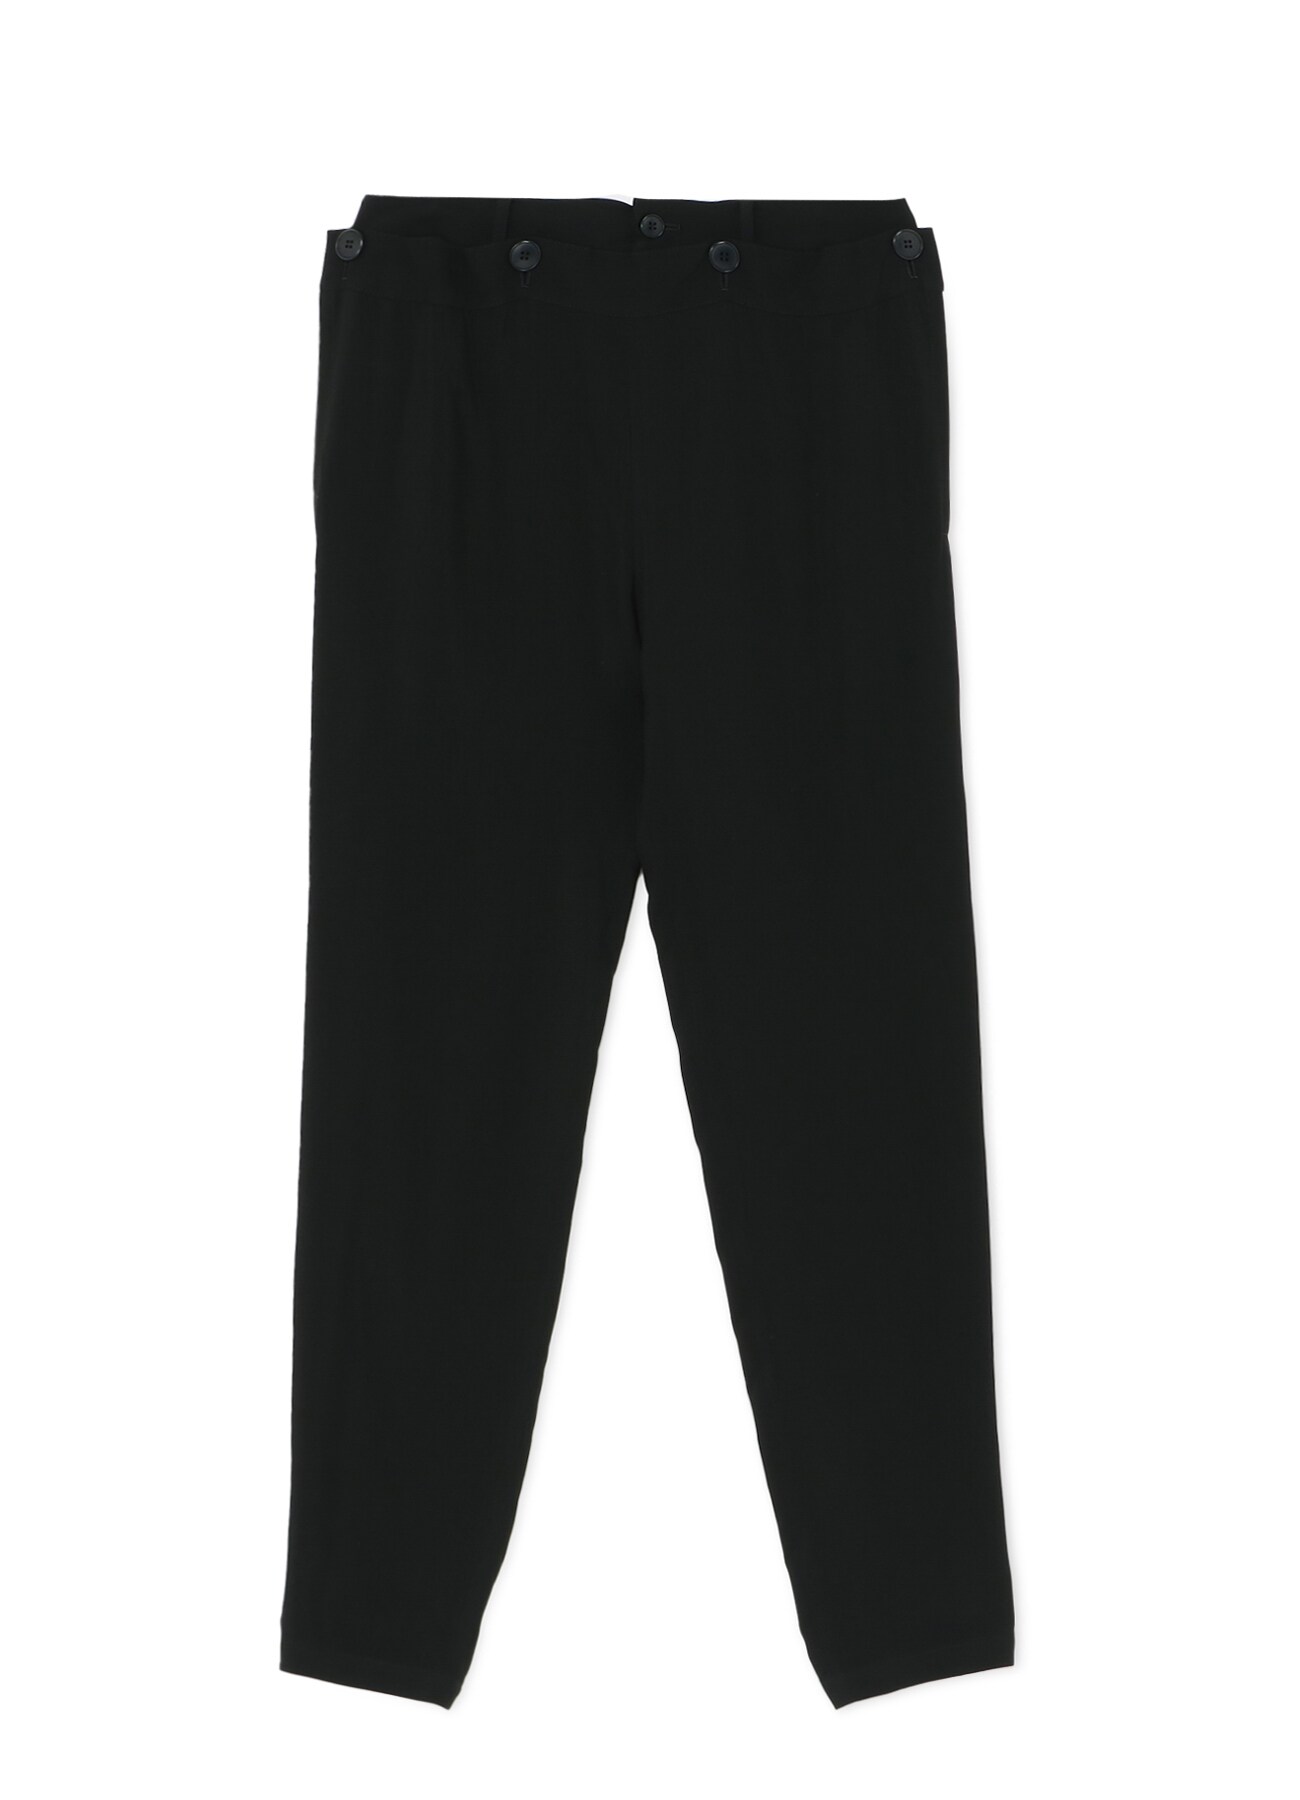 Ry/Cu Tussah Front Layered Pants